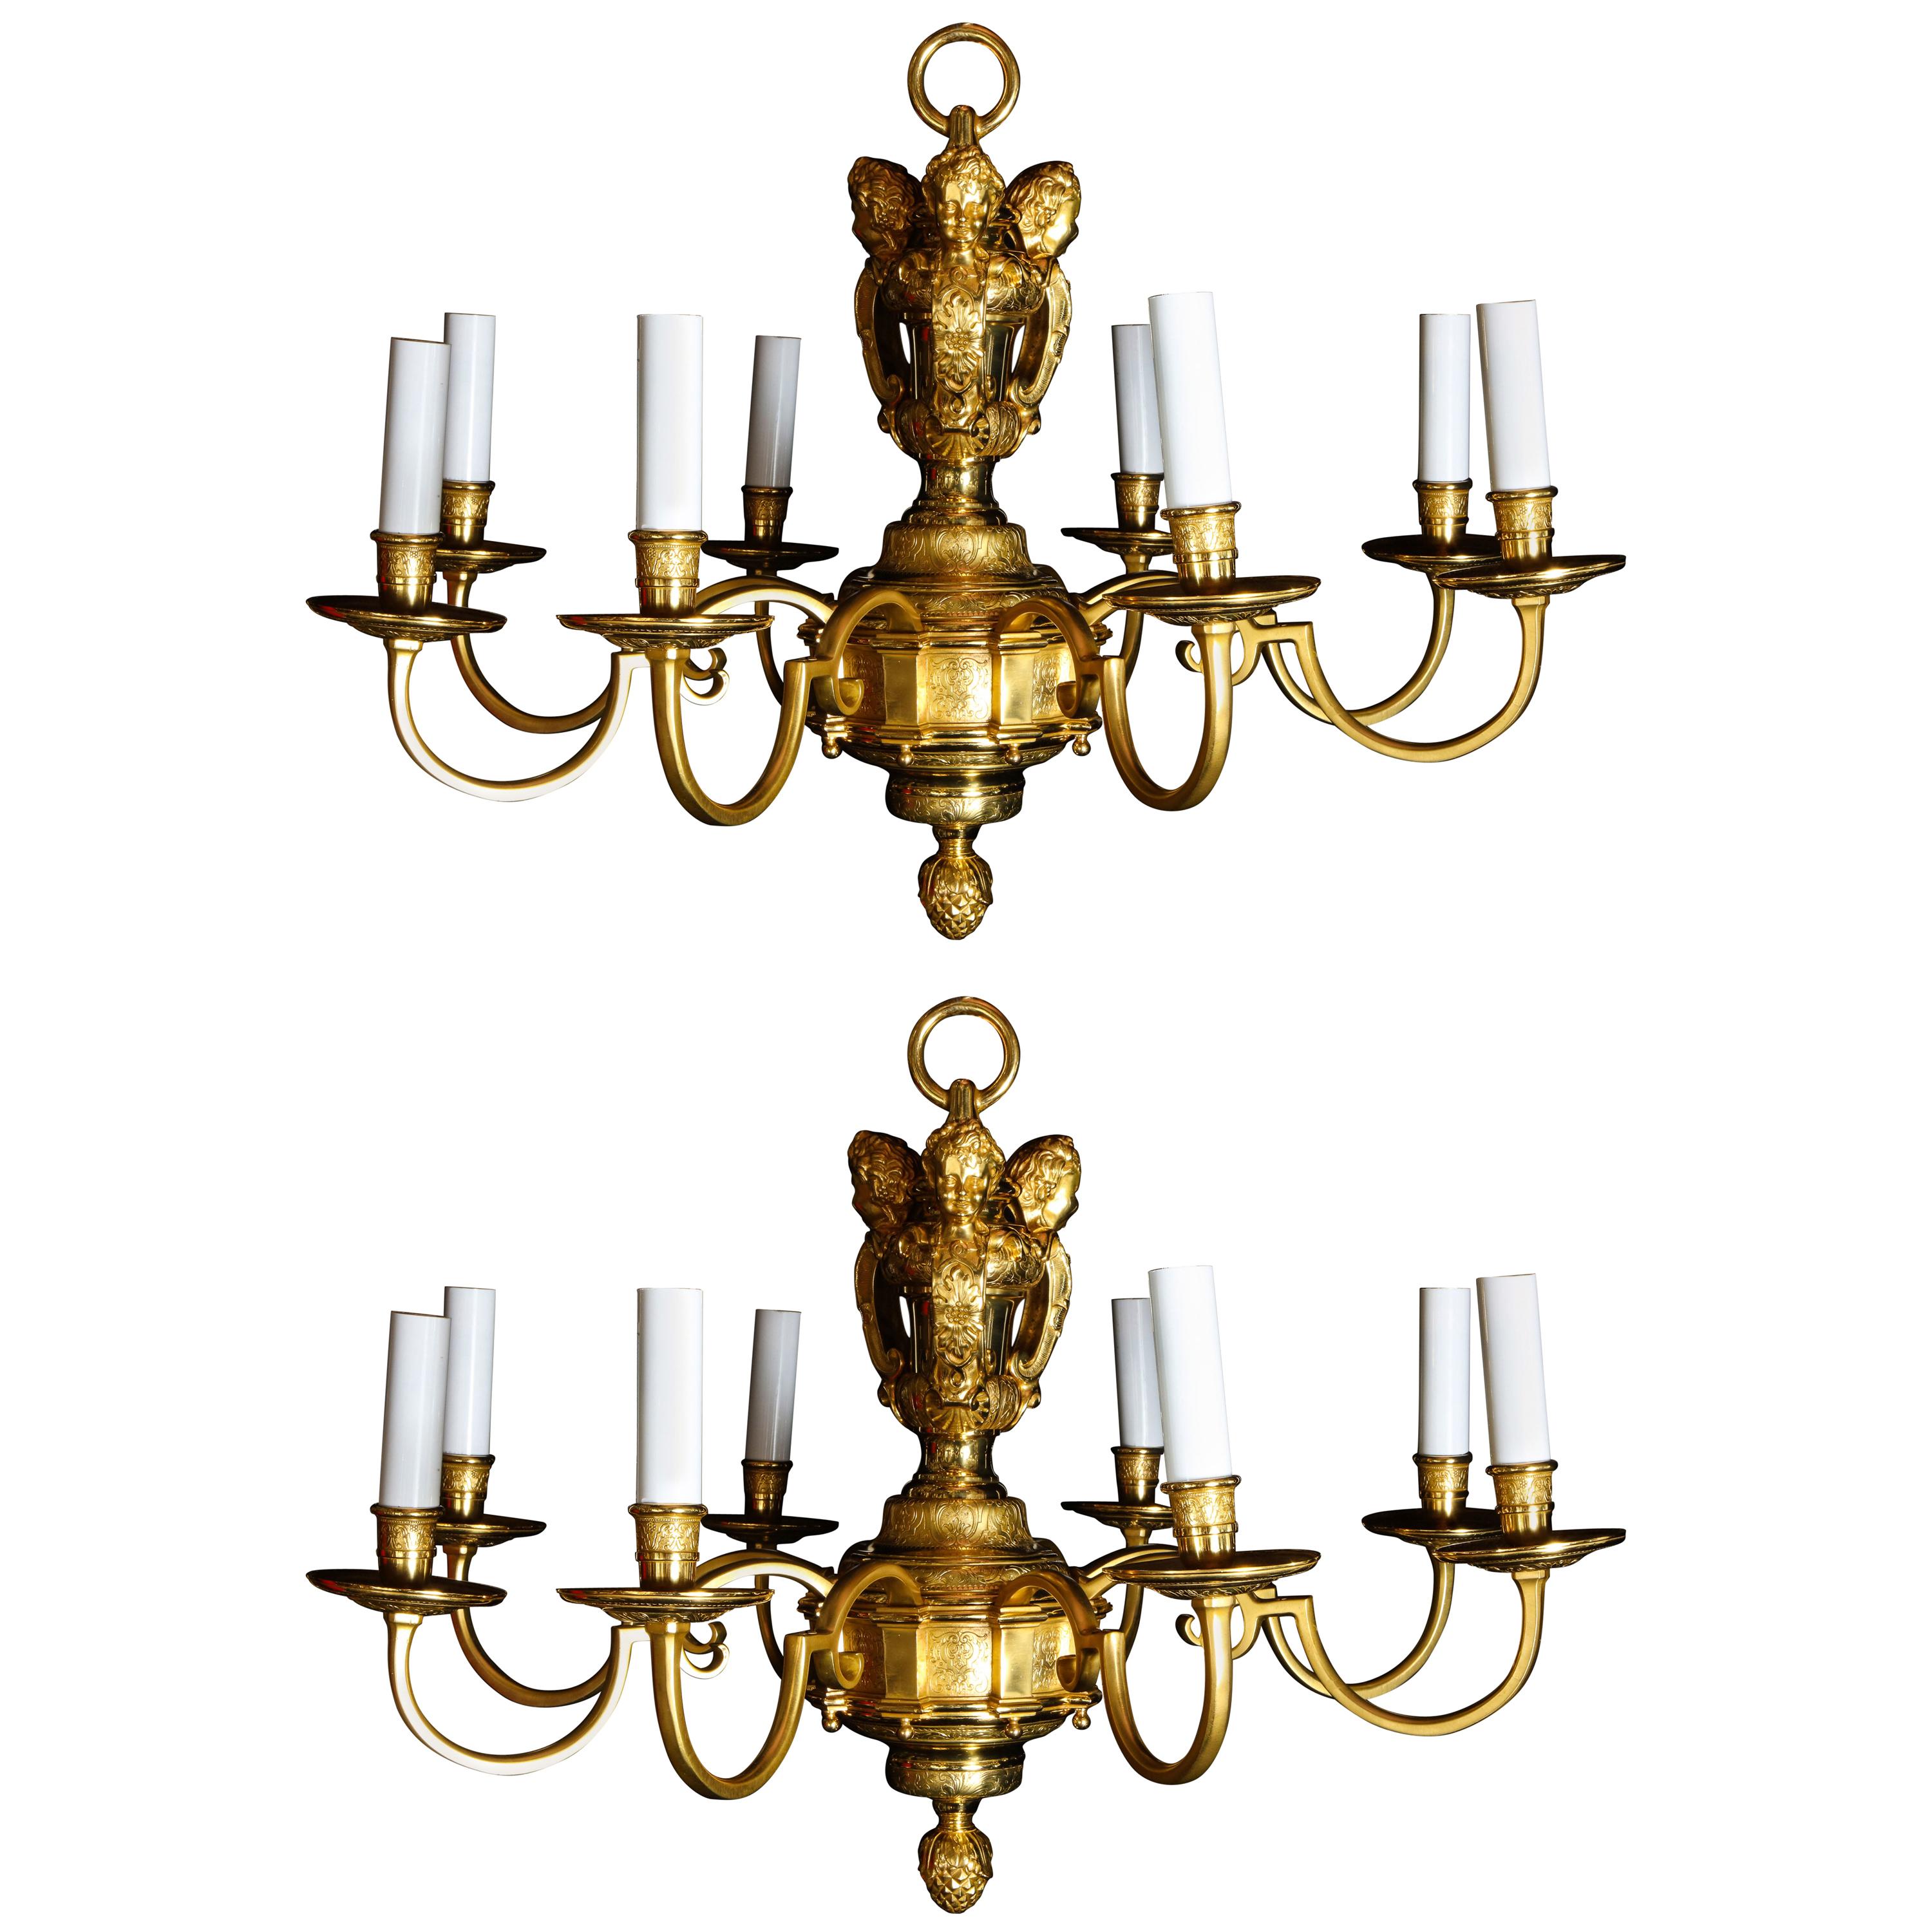 Pair of Fine Antique French Louis XVI Style Gilt Bronze Figural Chandeliers